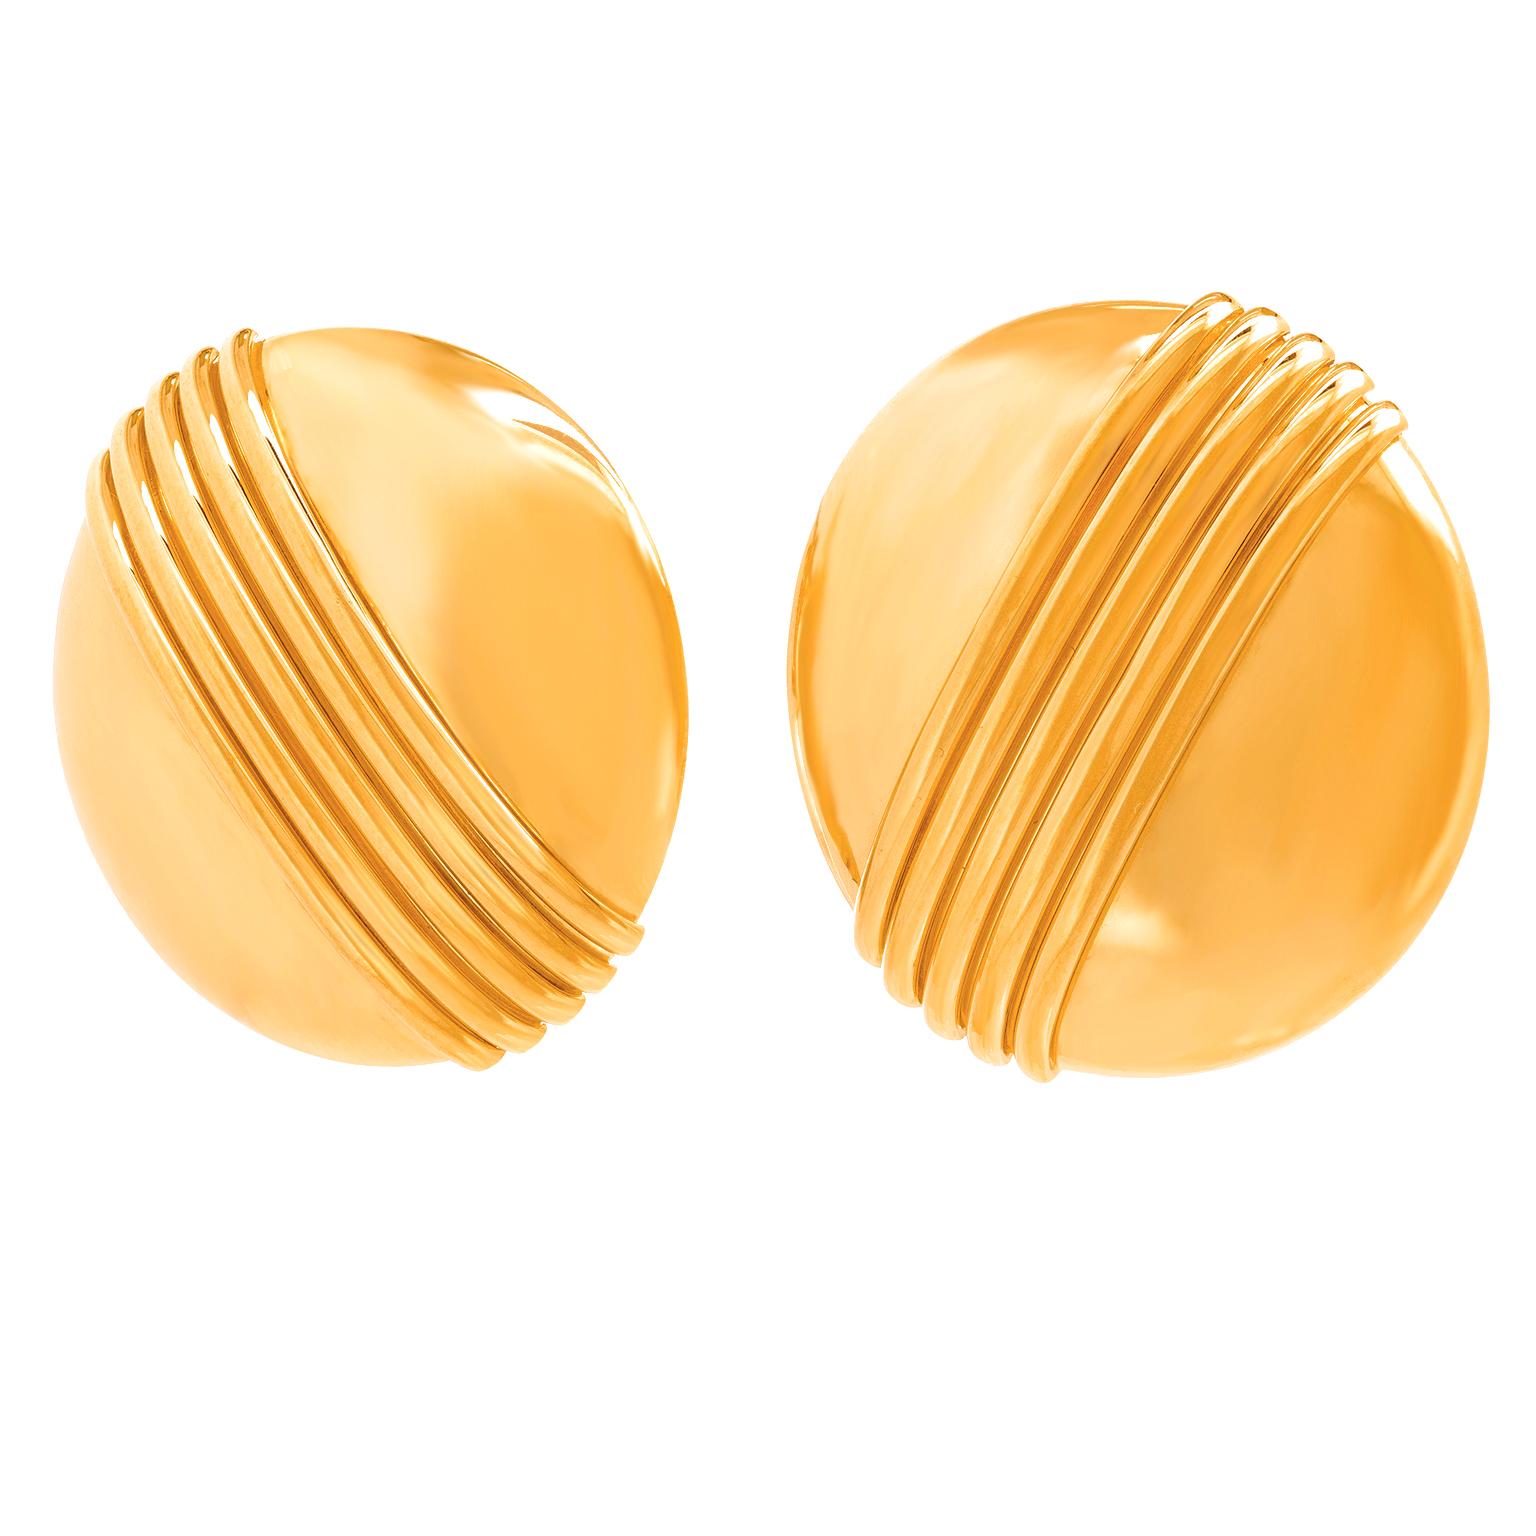 Paul Binder Gold Earrings In Excellent Condition For Sale In Litchfield, CT